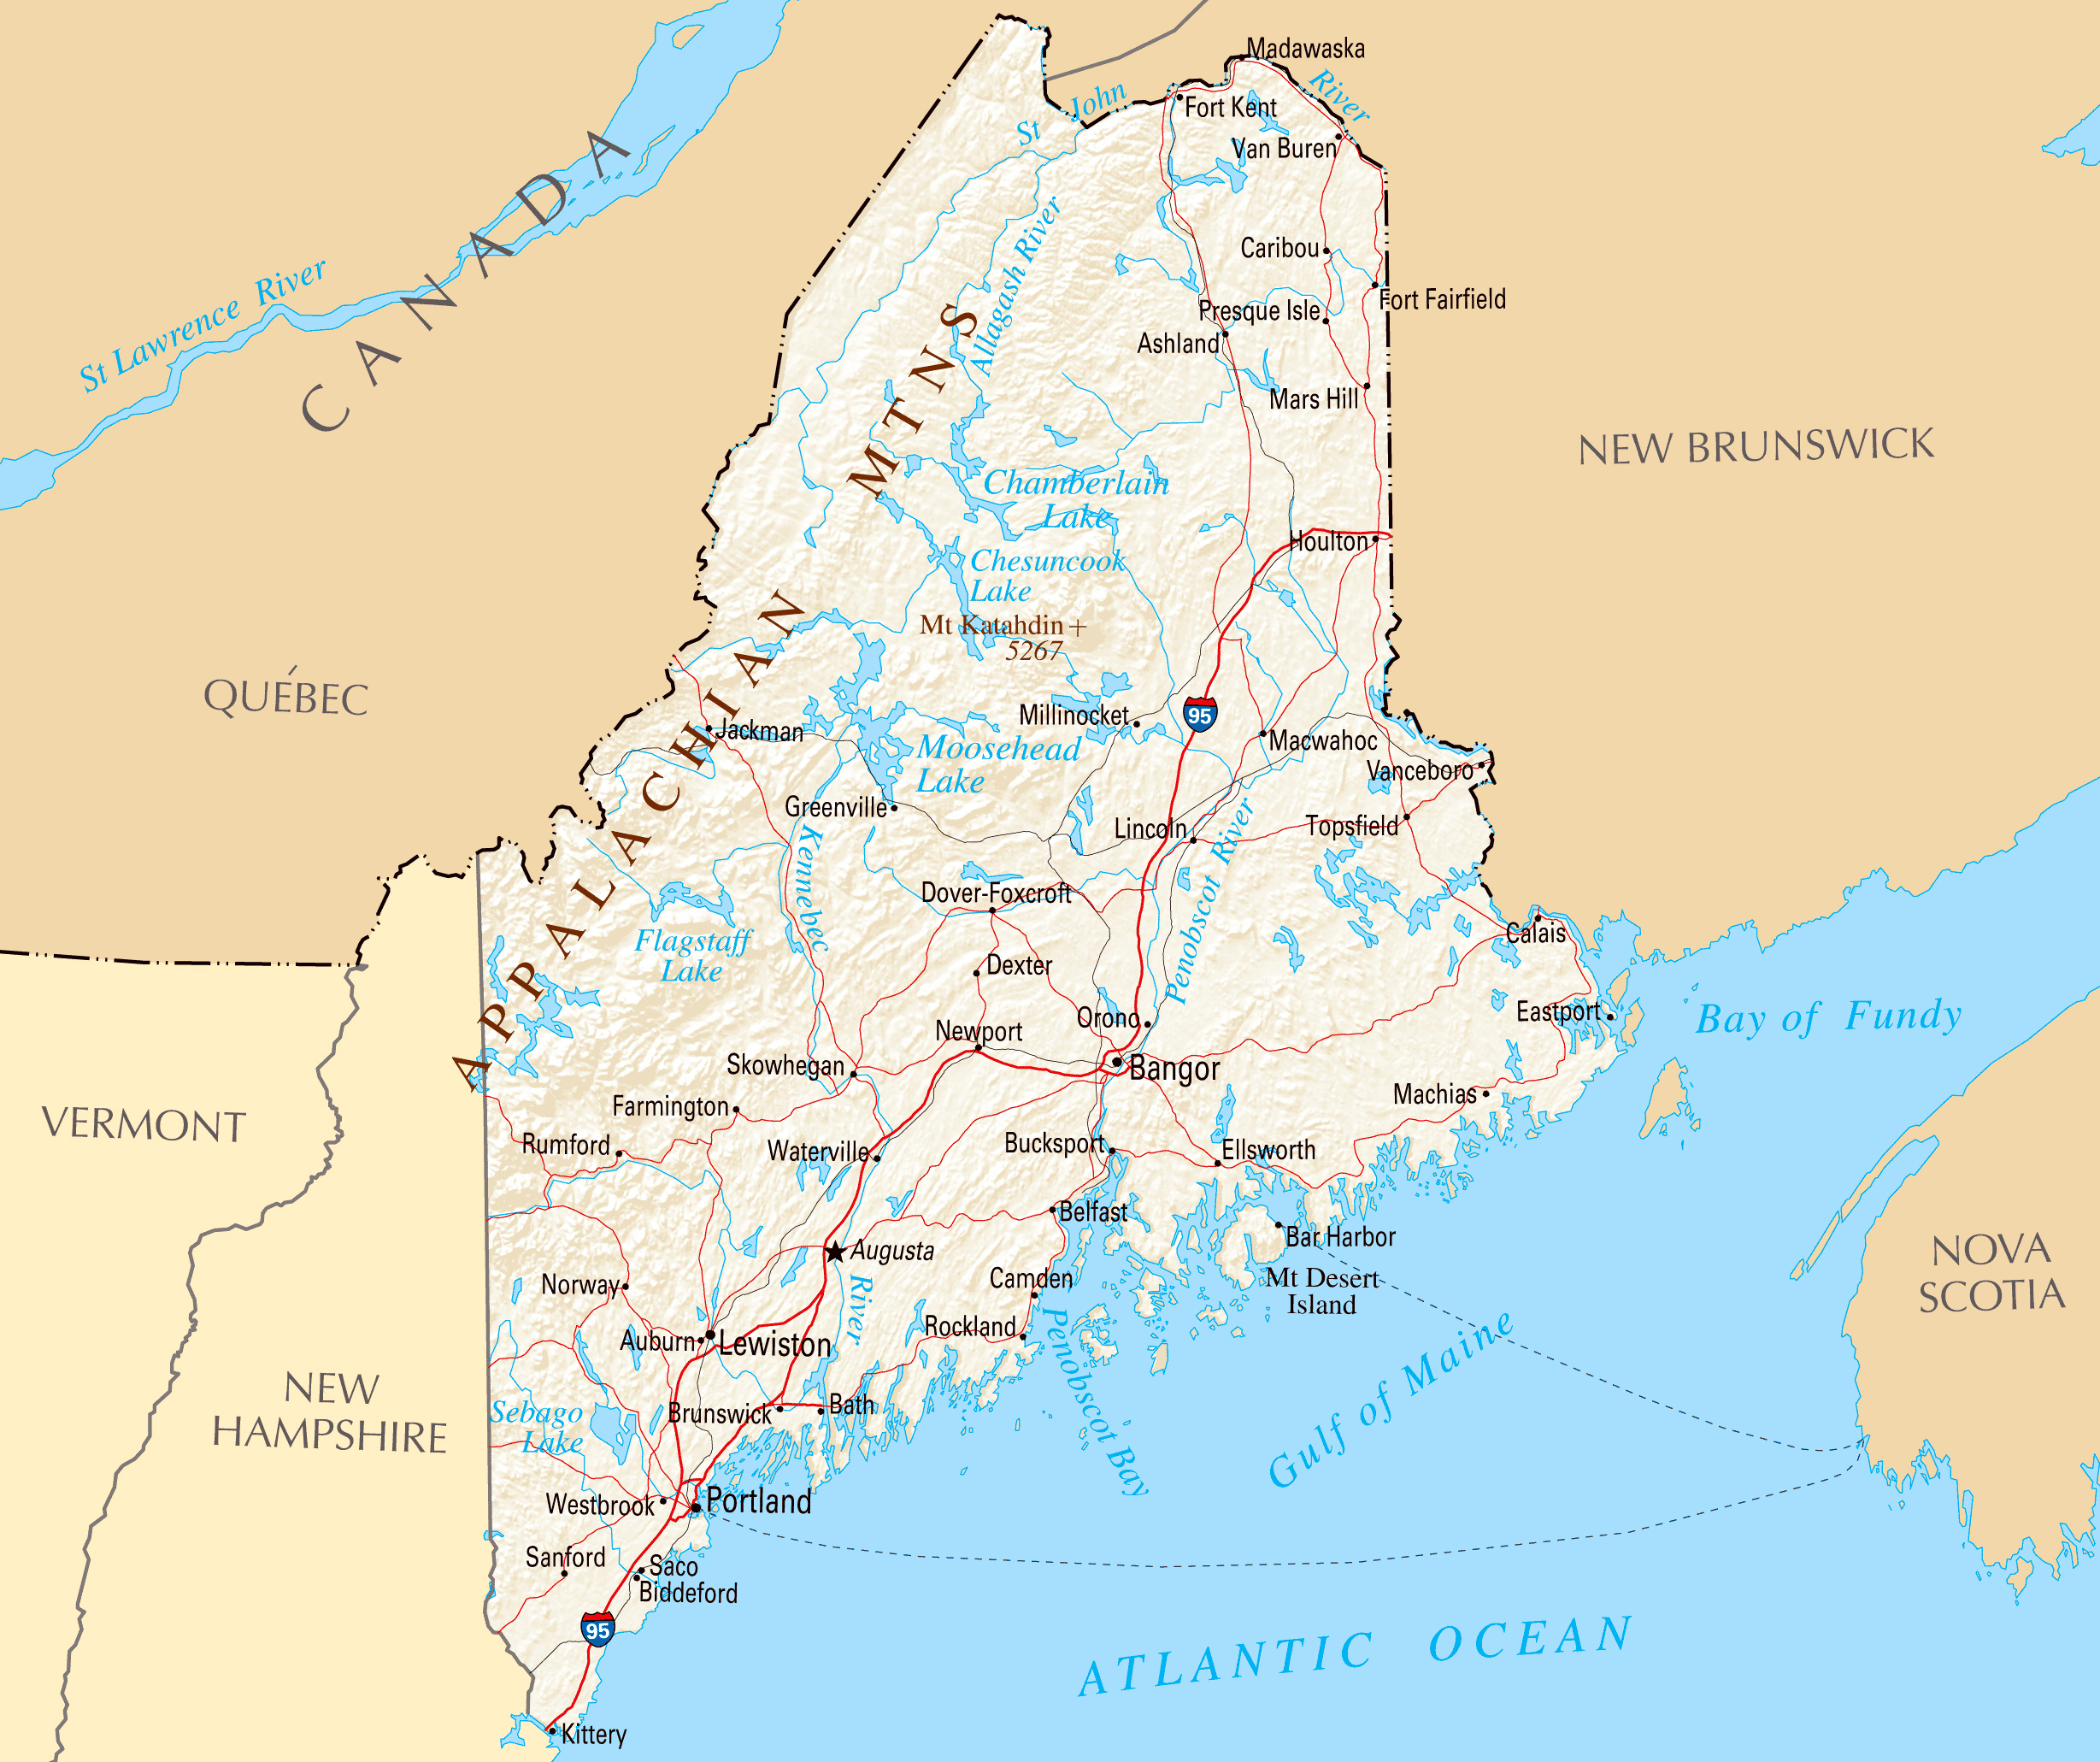 Large map of Maine state with relief, highways and major cities